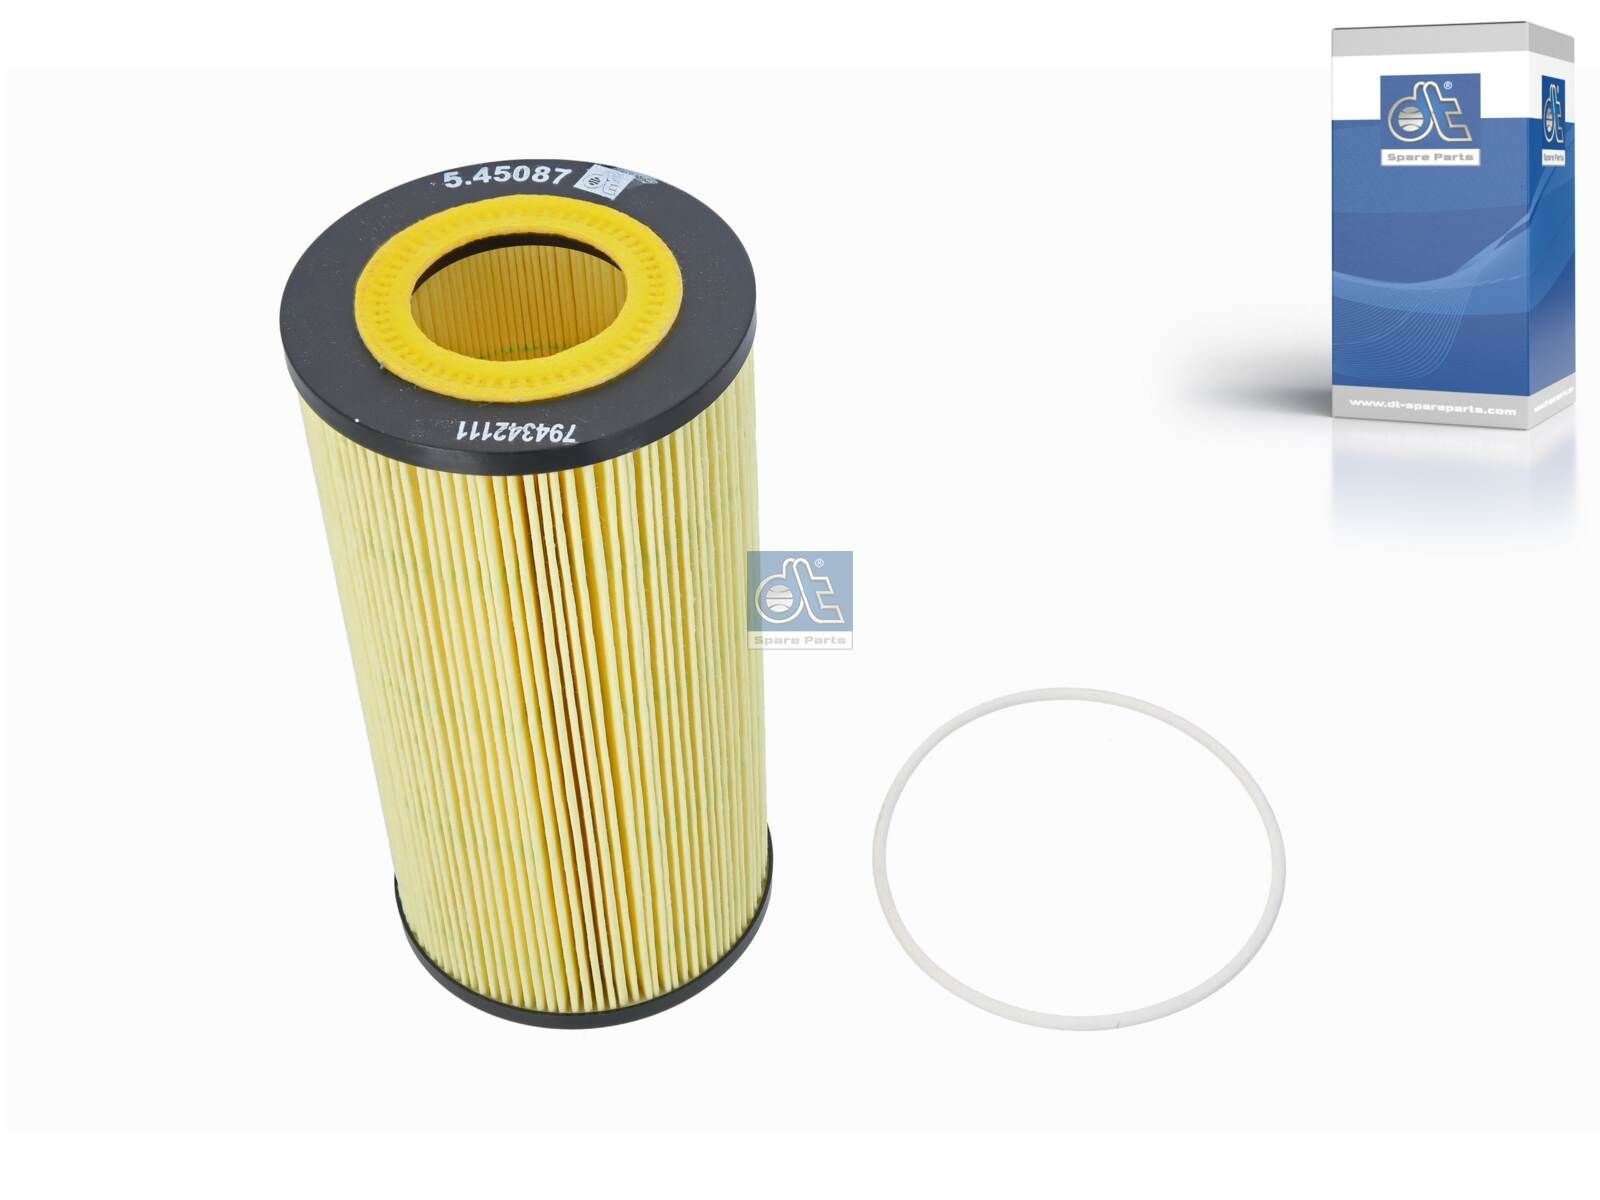 HU 12 103 x DT Spare Parts 5.45087 Oil filter 1 629 393